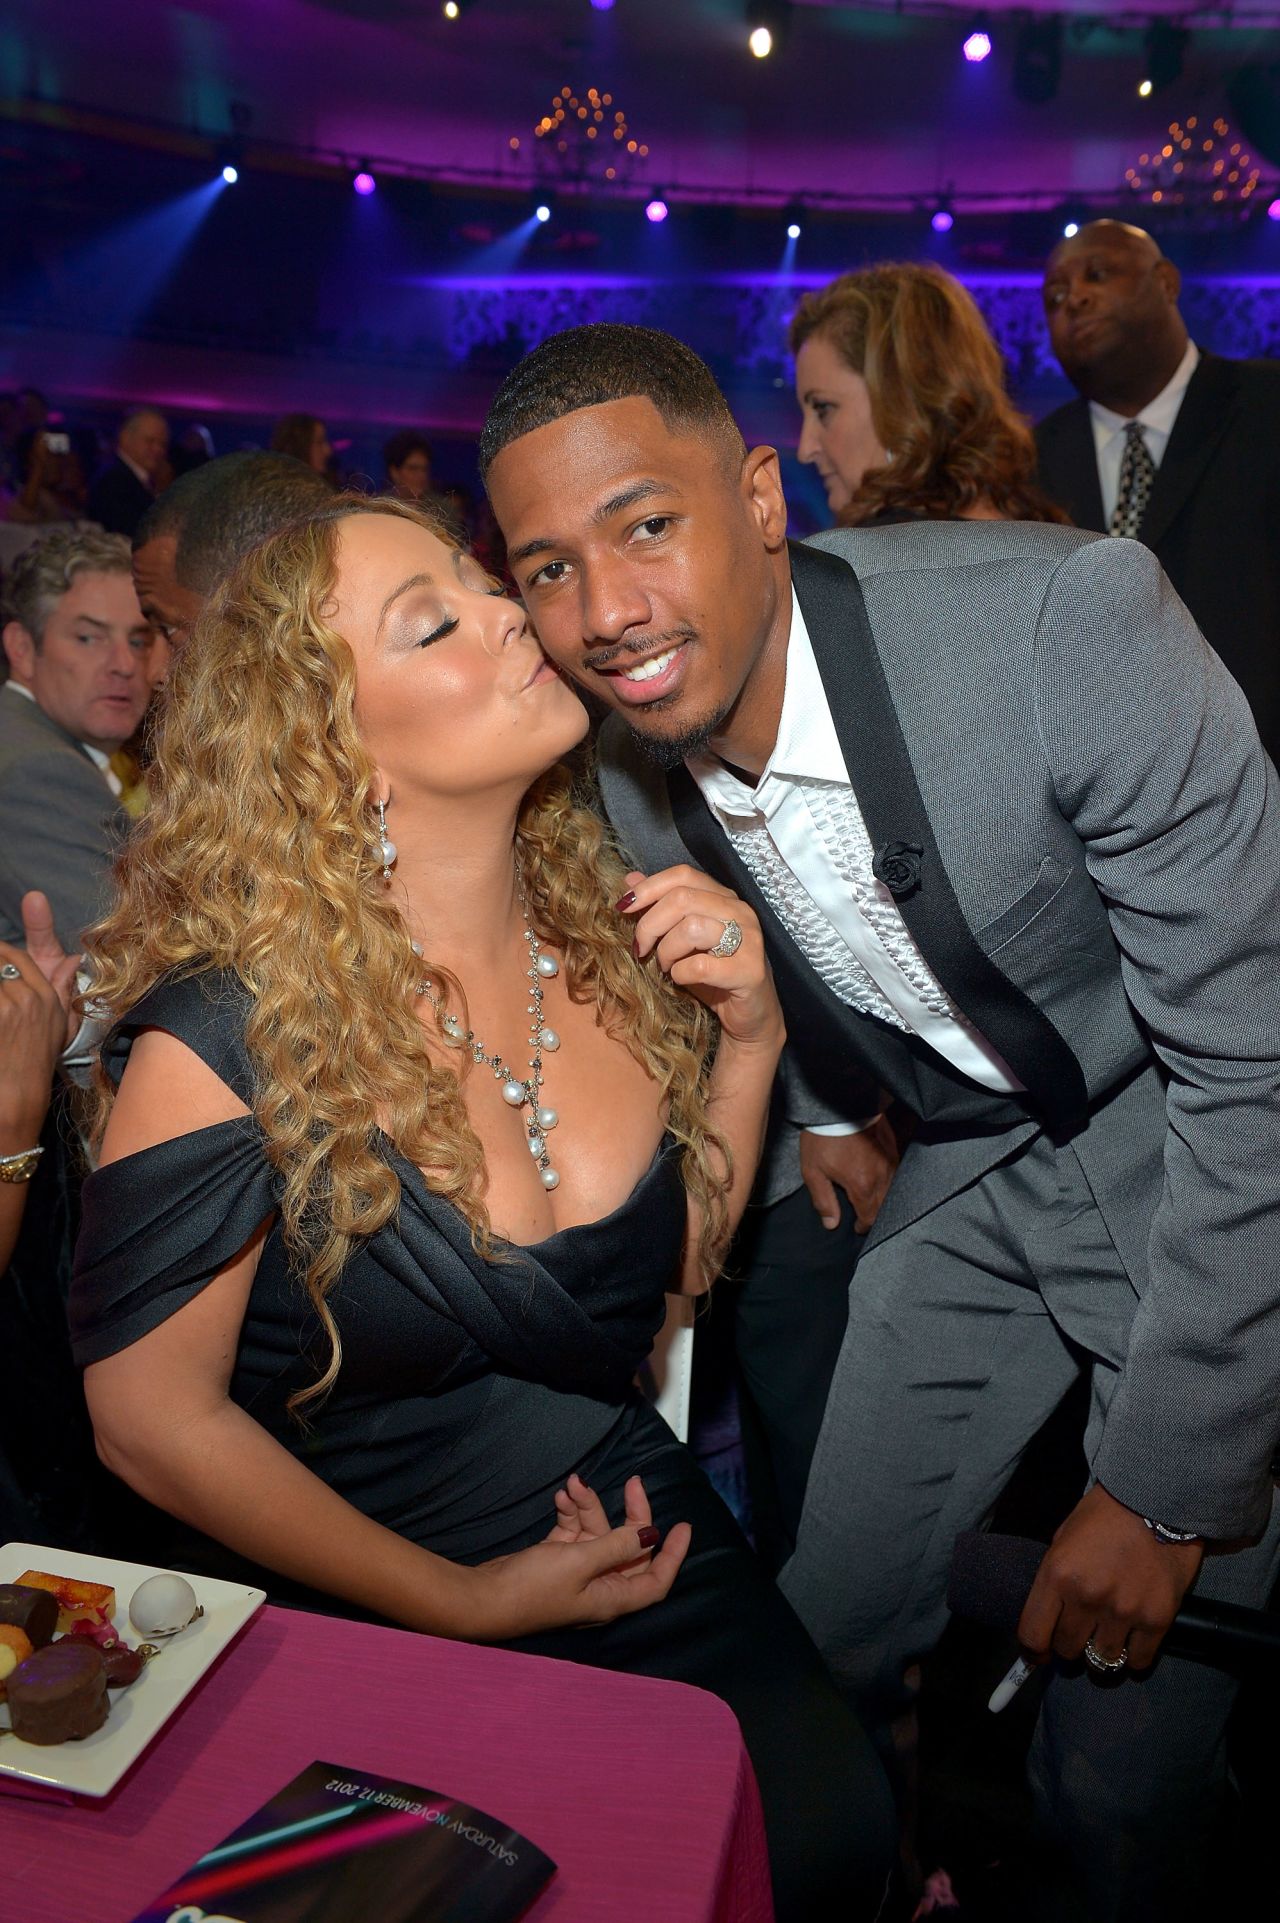 Nick Cannon pulled off a sweet surprise when he popped the question to singer Mariah Carey in 2008. He hid a 17-carat emerald-cut pink center diamond <a href="http://www.oprah.com/relationships/Hollywood-Love-Stories/15" target="_blank" target="_blank">inside a candy Ring Pop.</a>